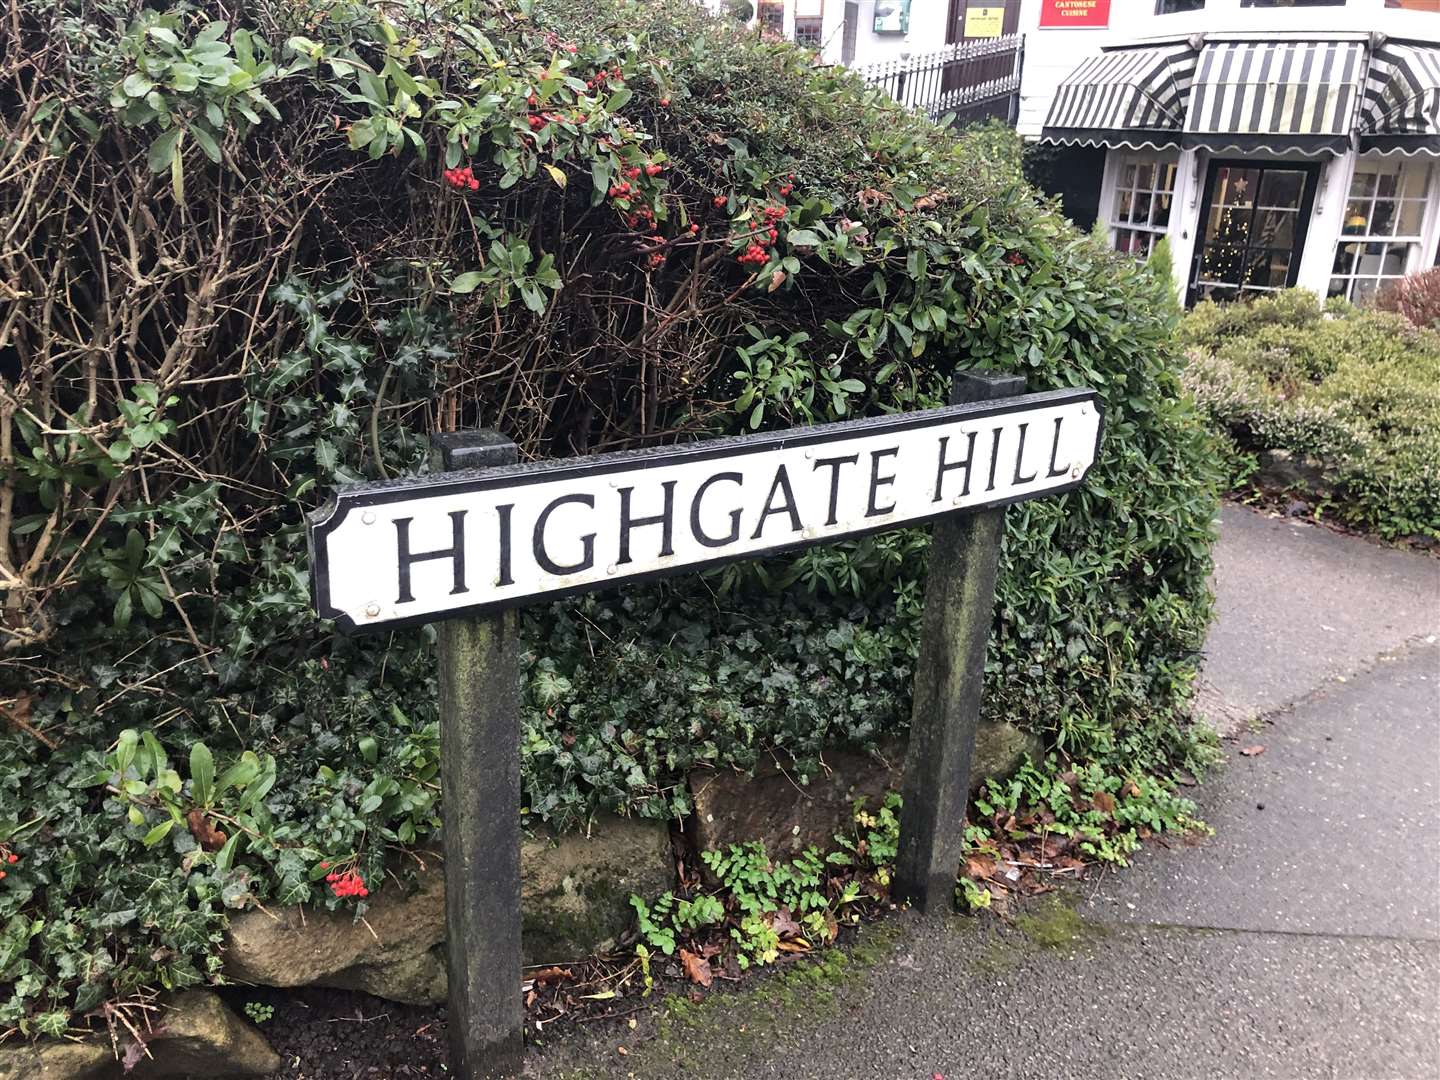 The access will now be directly off Highgate Hill